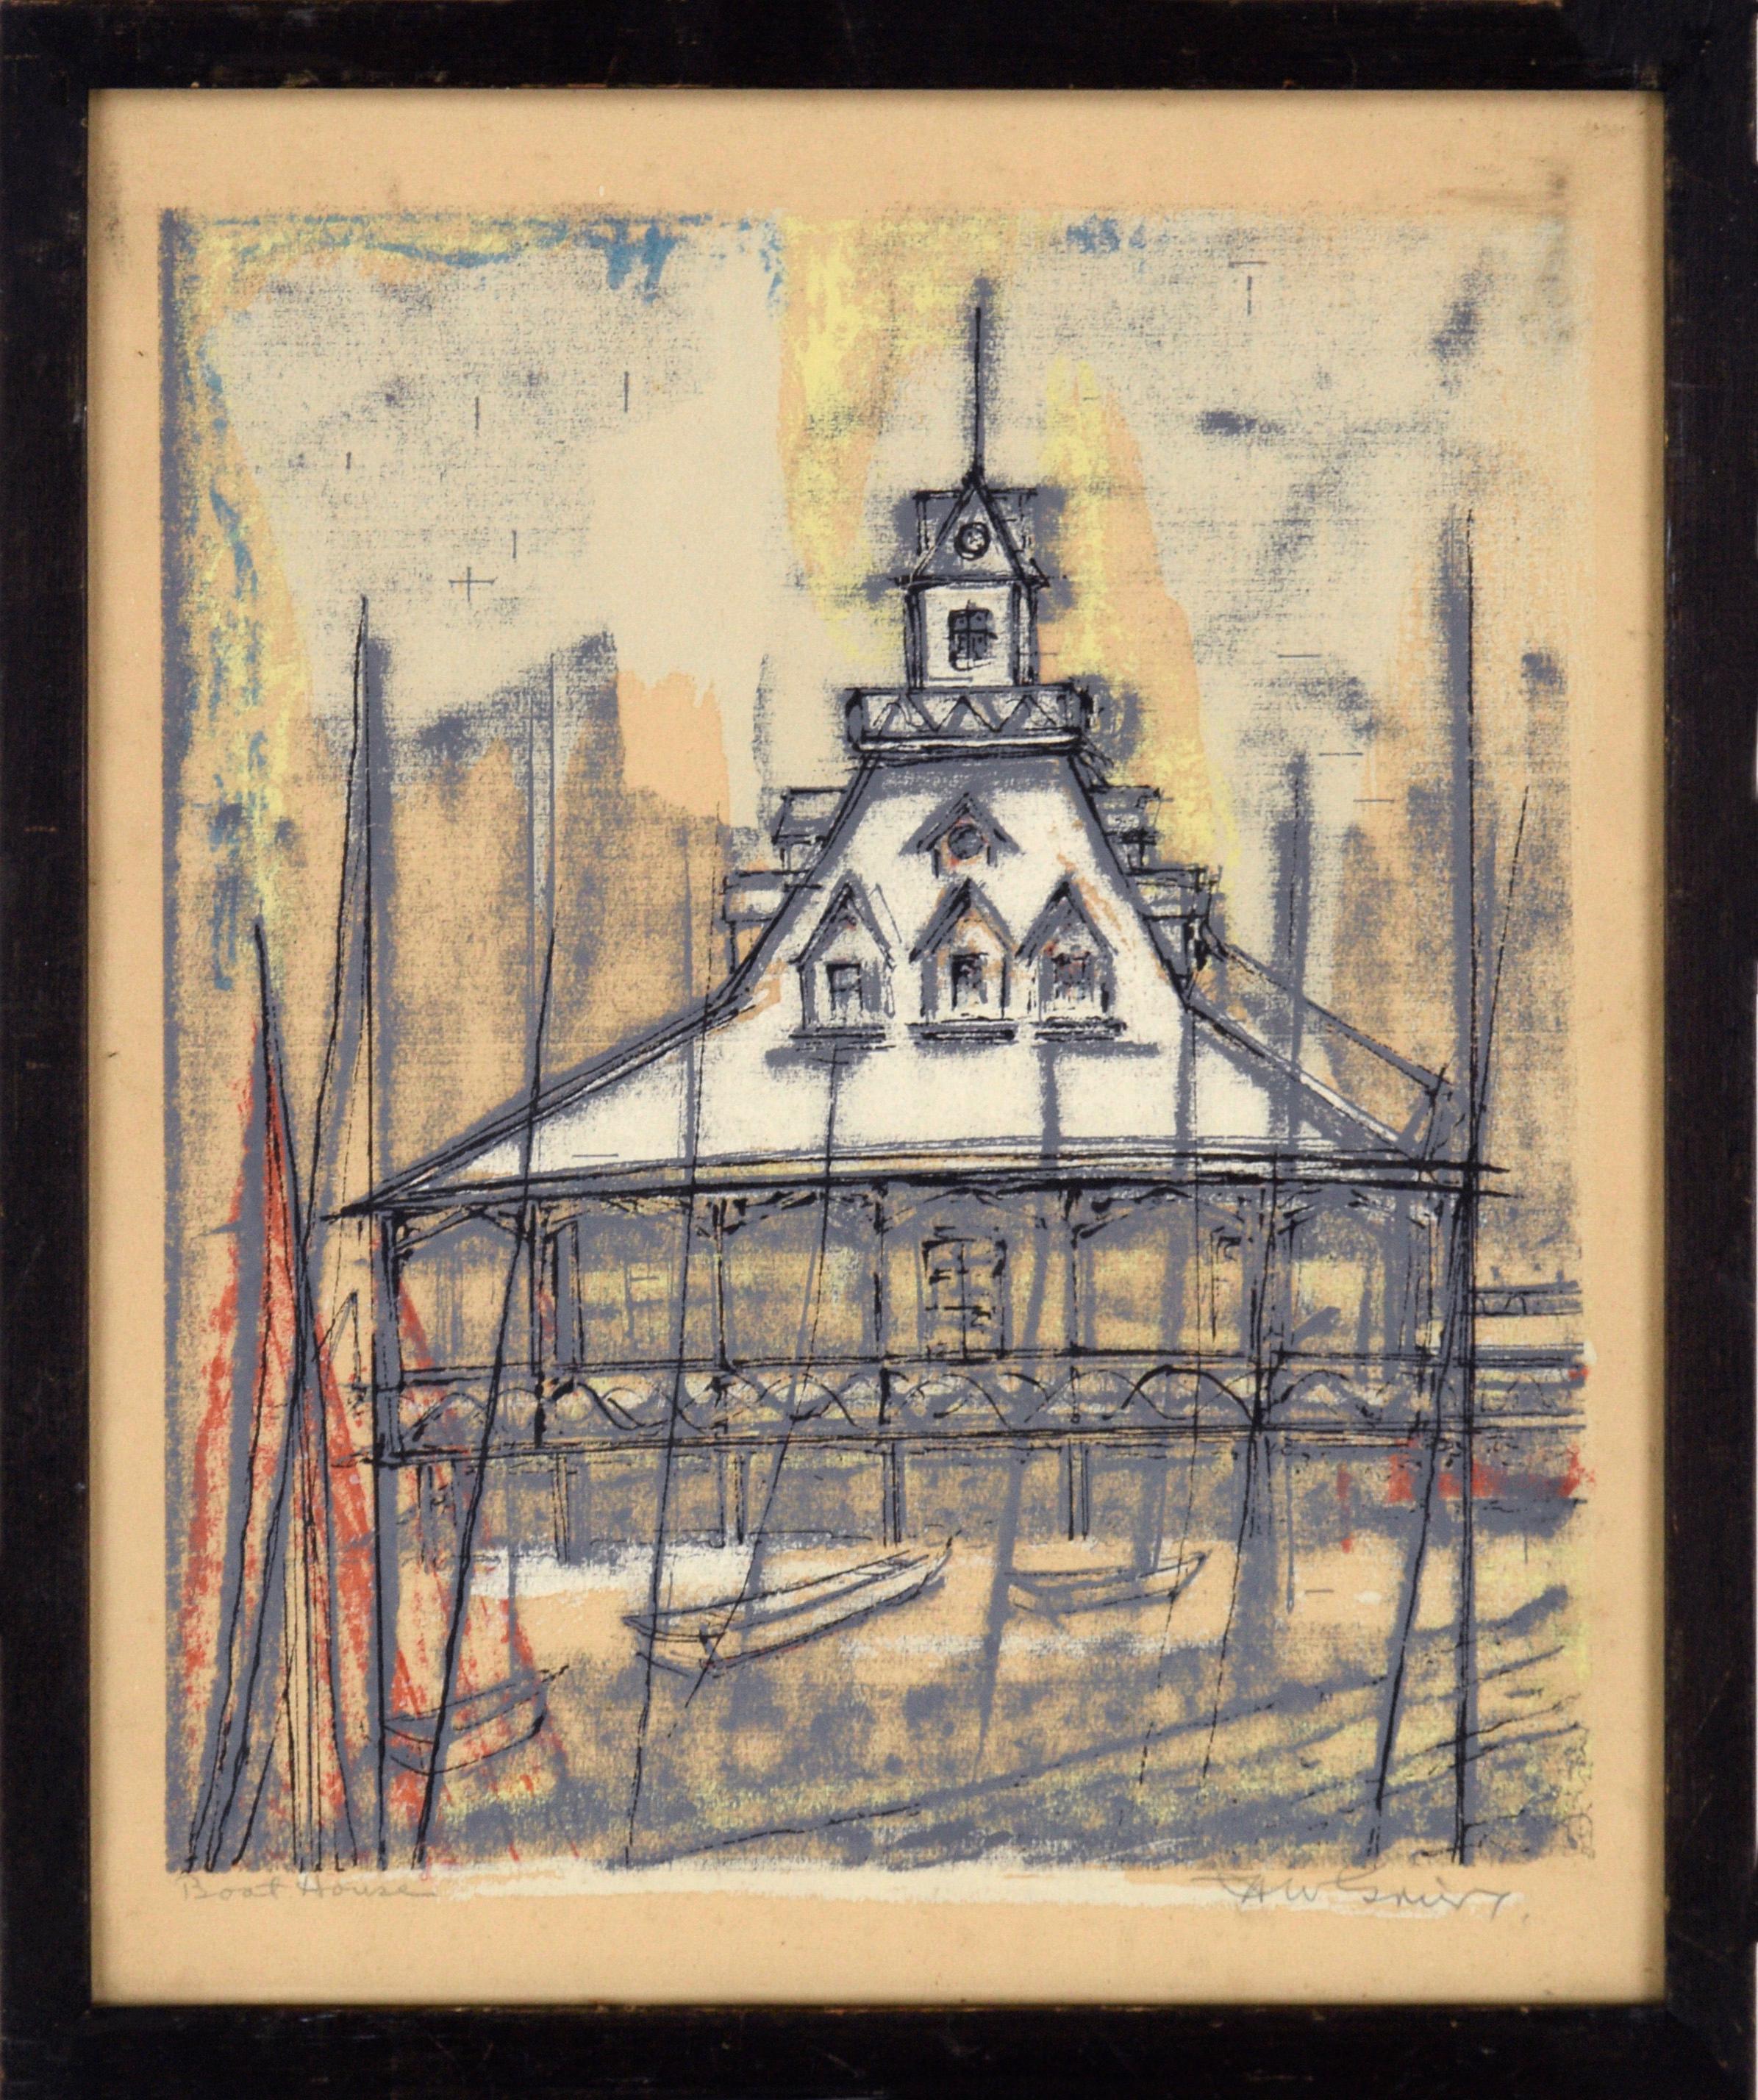 H. Wilson Smith Landscape Print - "Boat House" San Diego- Multi Layer Screen Print in Ink on Cardstock